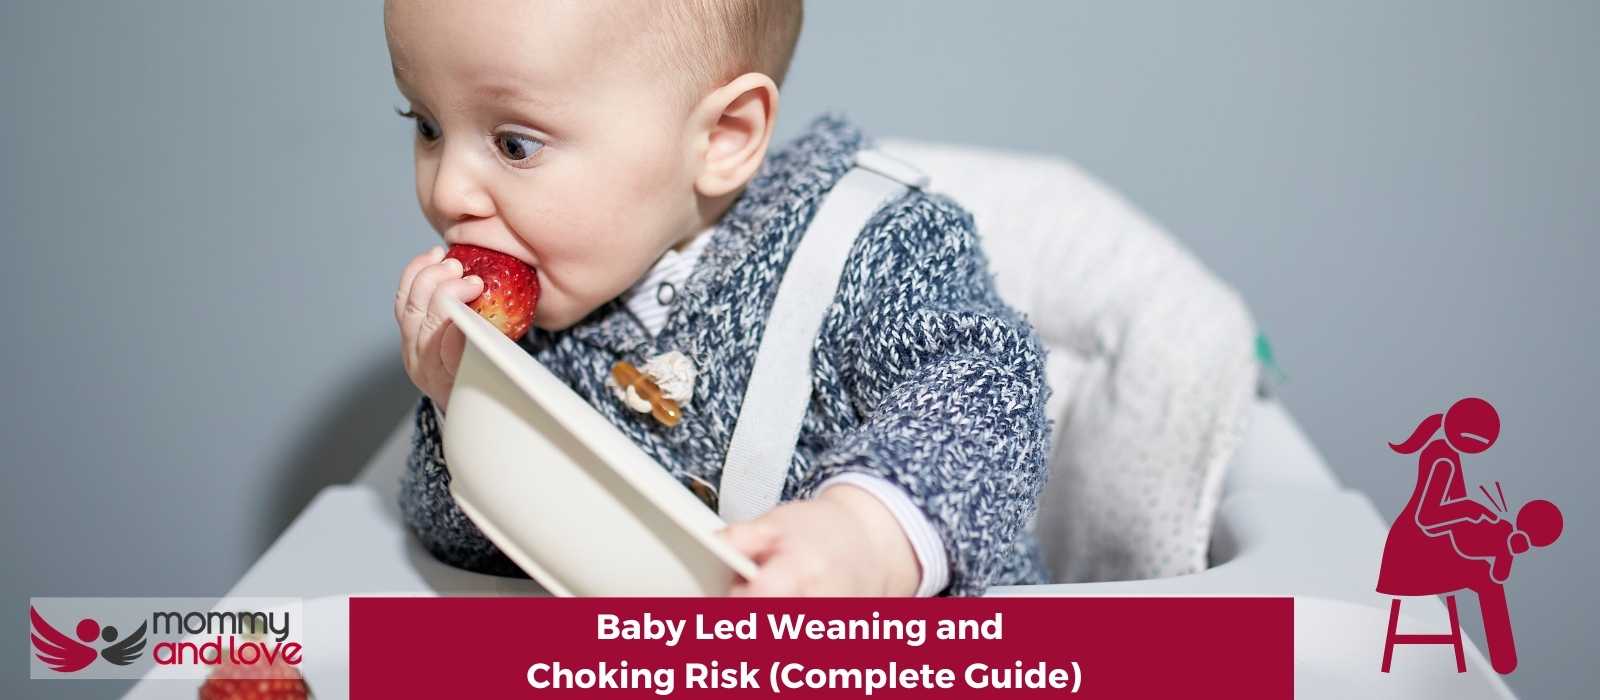 Baby Led Weaning and Choking Risk (Complete Guide)